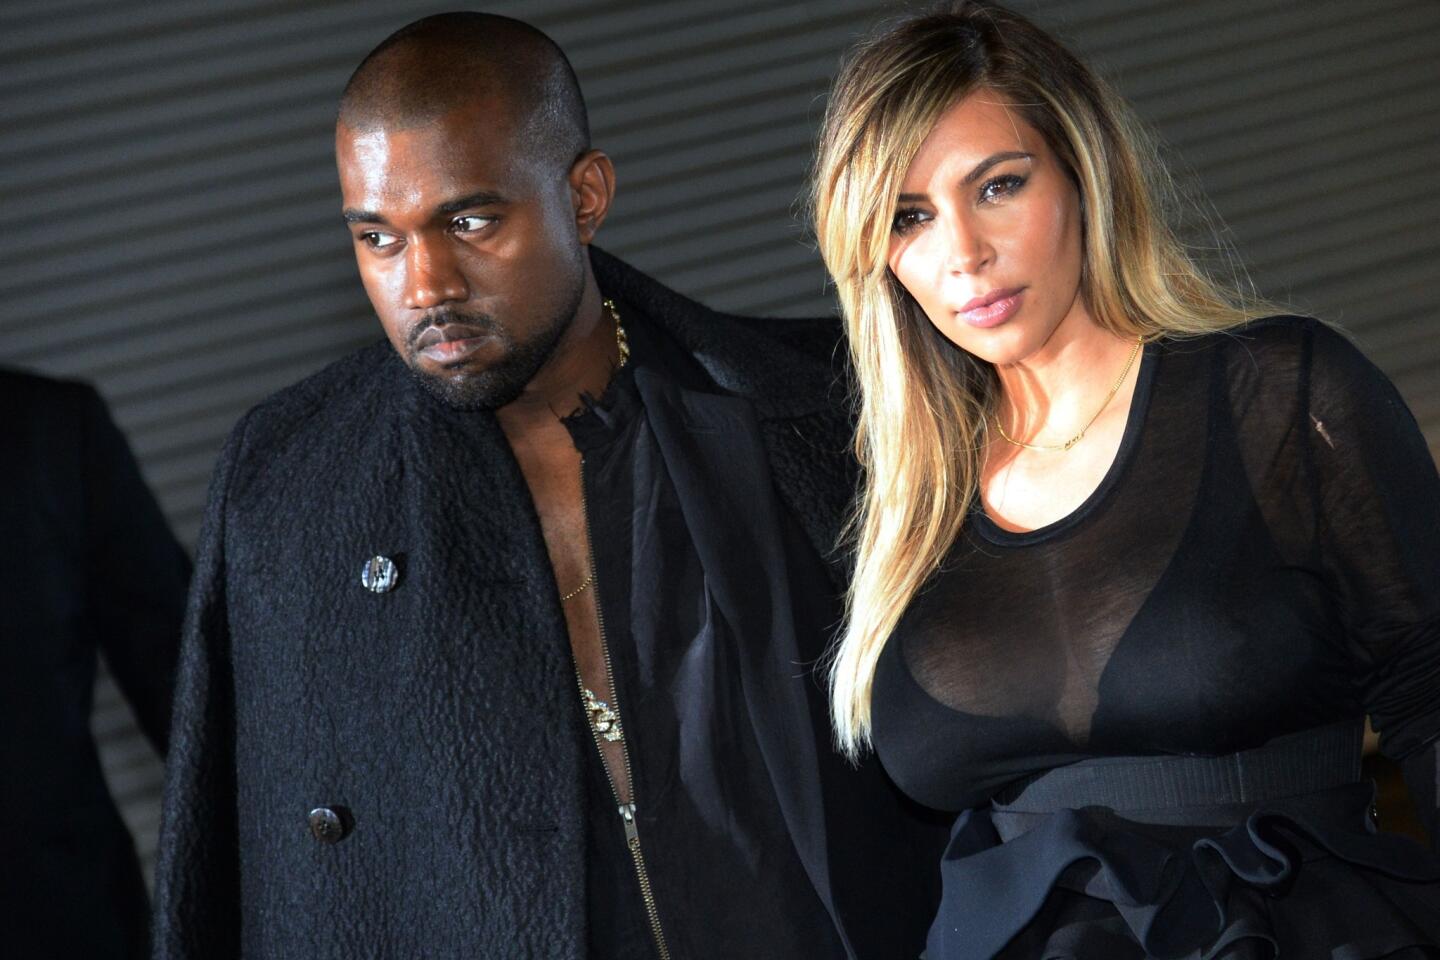 Musician Kanye West and girlfriend Kim Kardashian at the Givenchy 2014 spring-summer ready-to-wear collection fashion show on Sept. 29, 2013, in Paris.